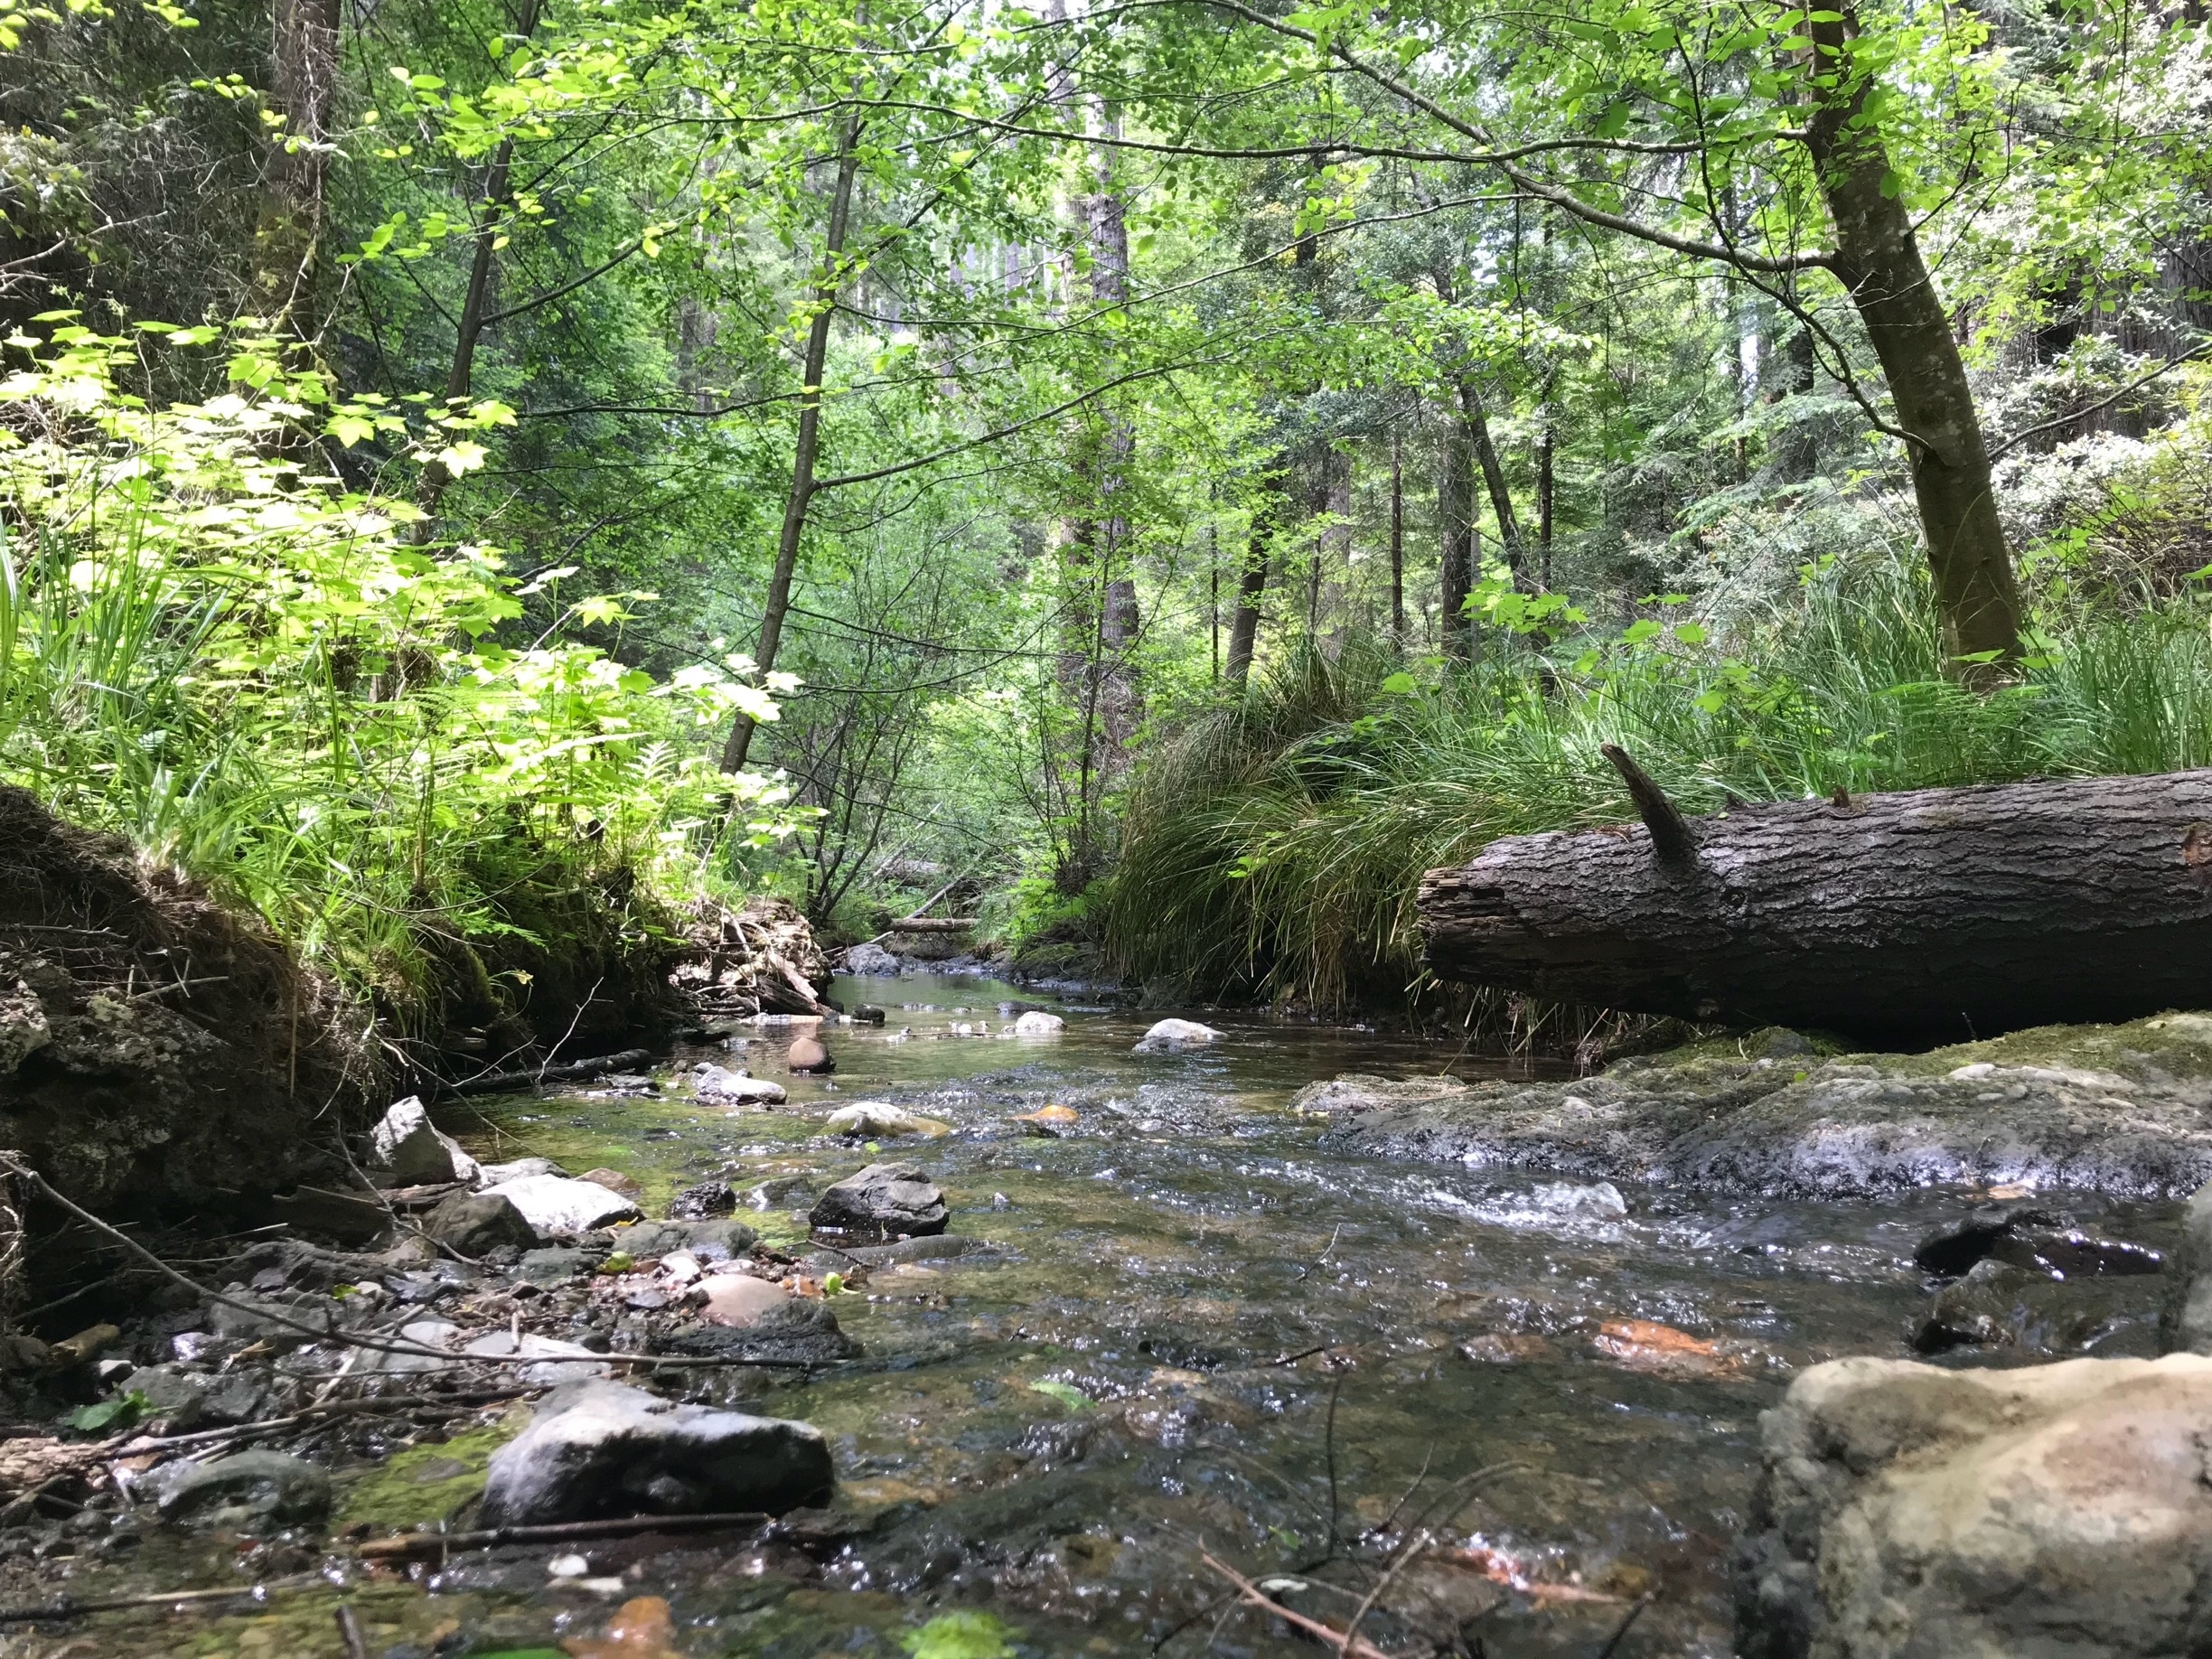 The Fern Canyon Trail in Van Damme State Park did not disappoint. It winds through a dense fern-filled forest along “Little River”. If you’re looking for a secluded trail to enjoy the fresh air and nature sounds, this is the place to be. 